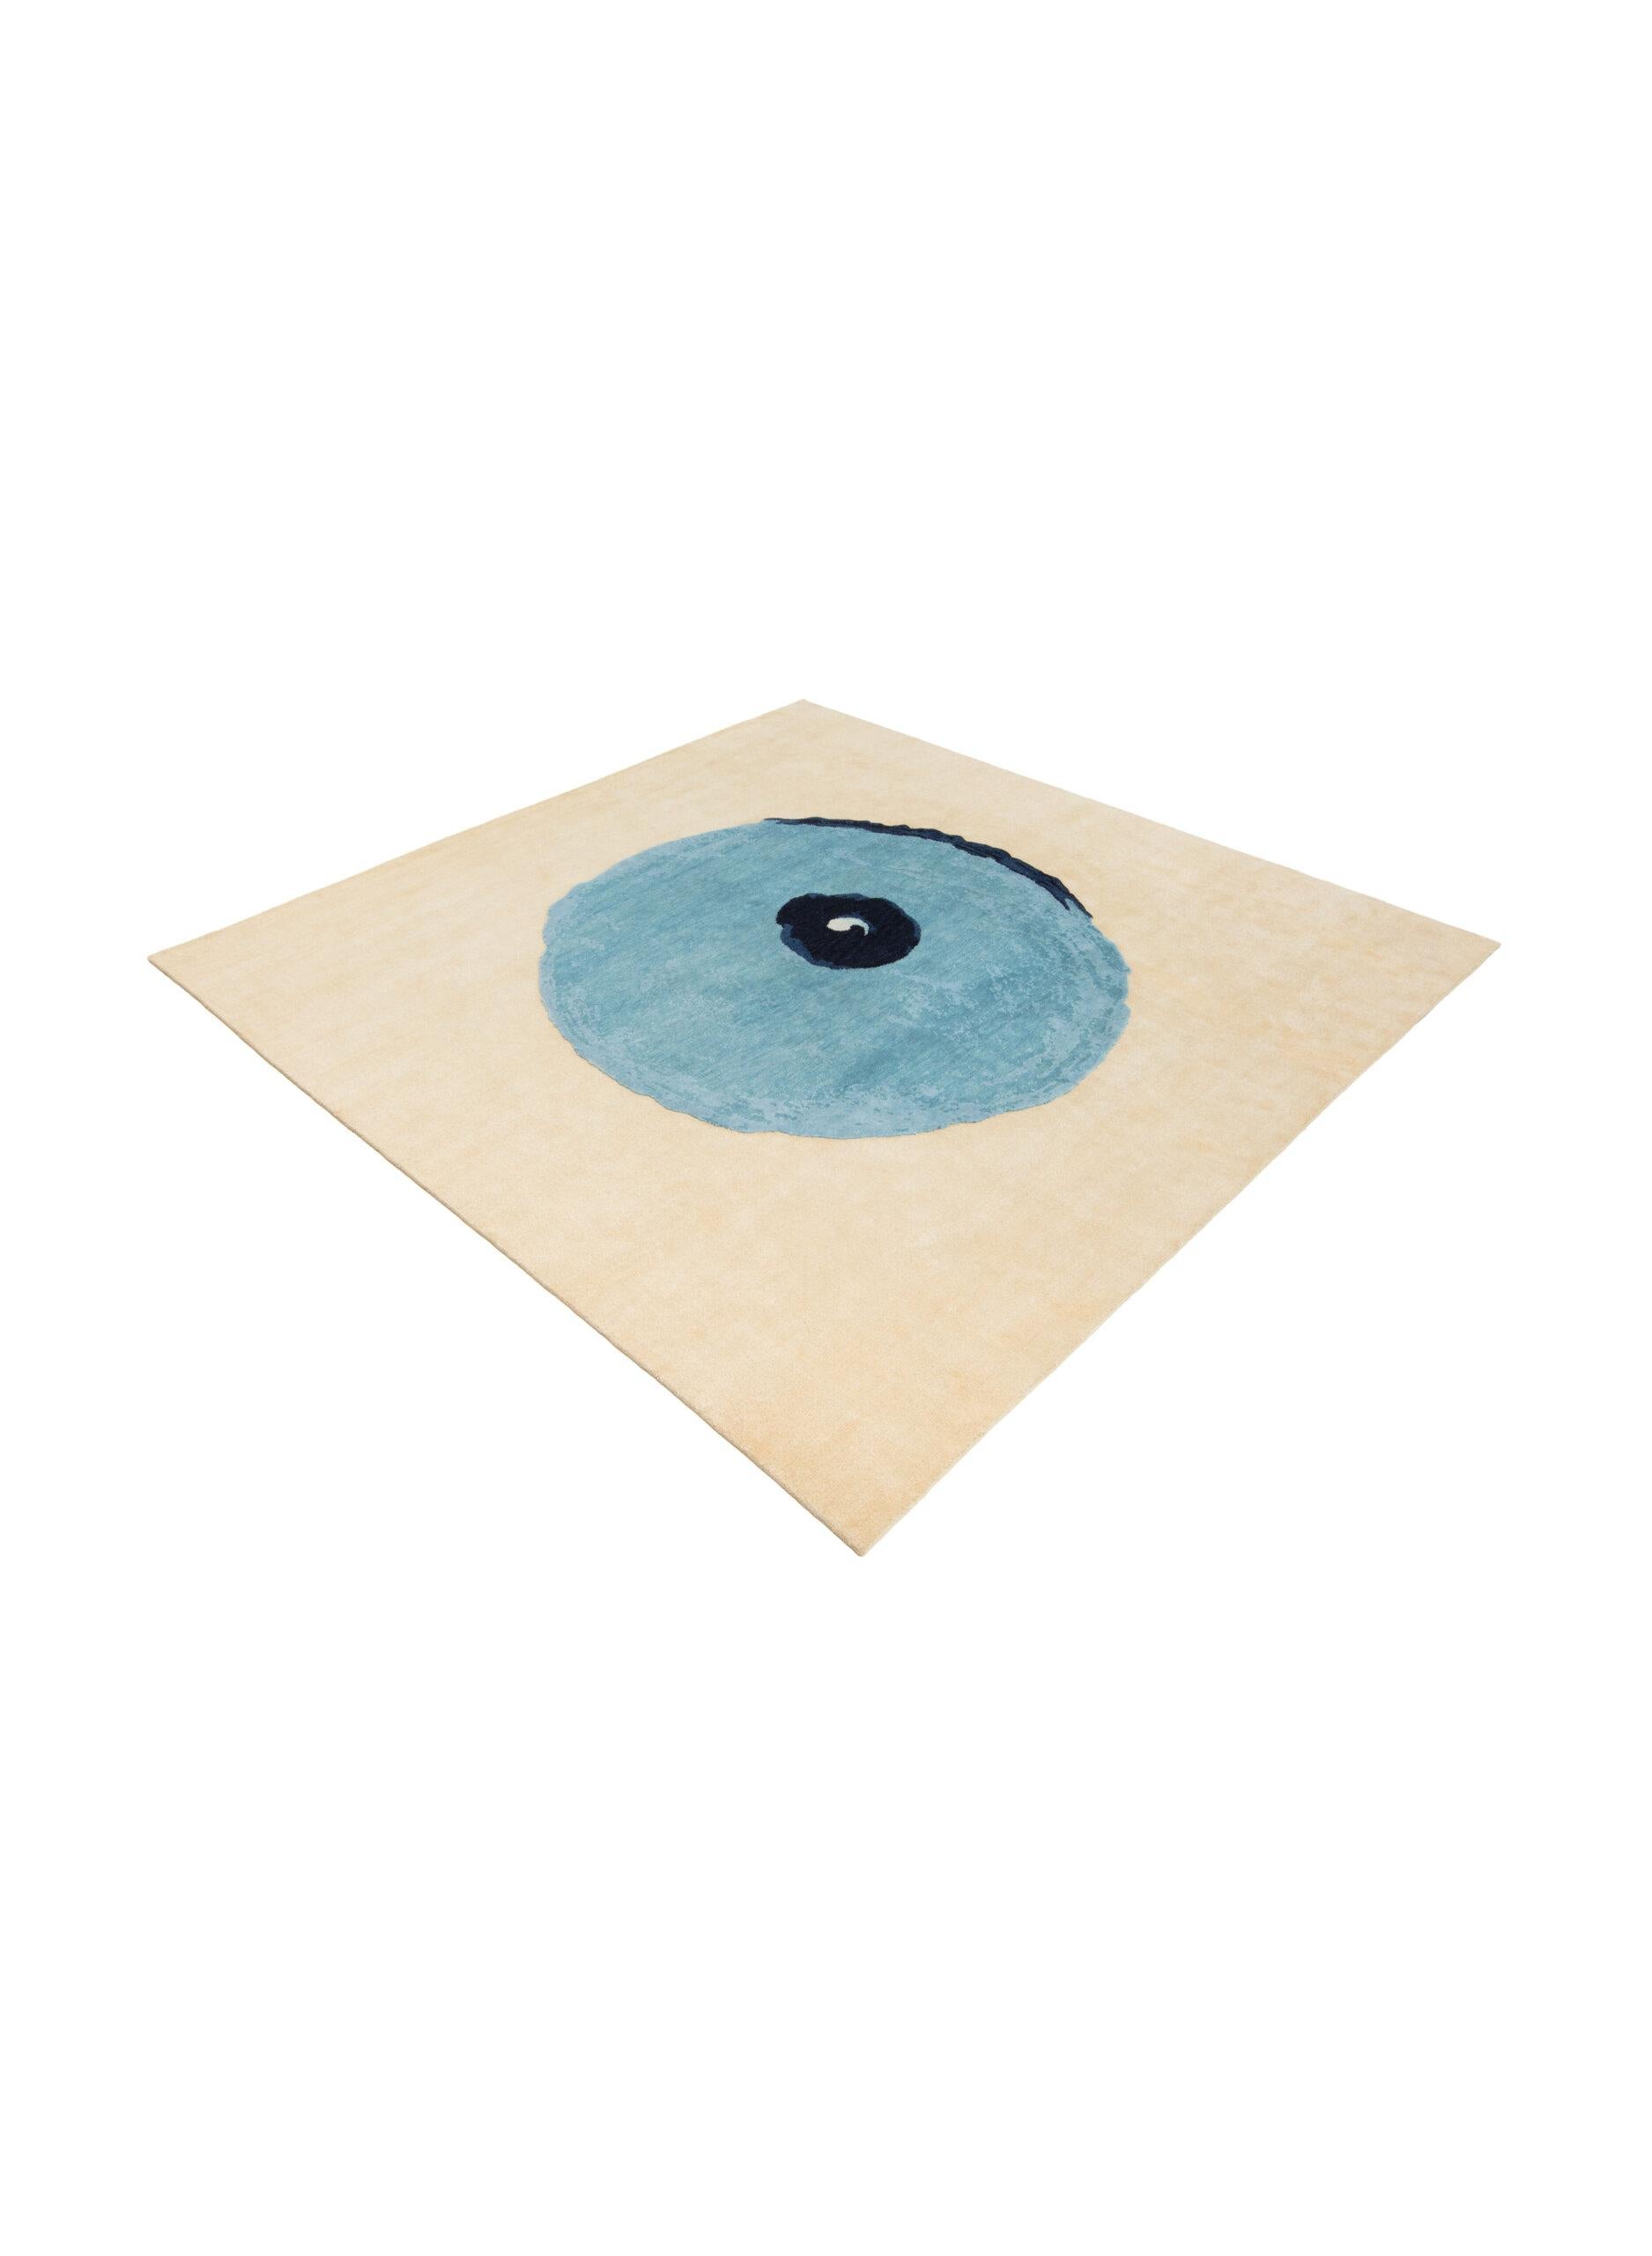 Linen cc-tapis RUDE COLLECTION - BLUE TIT handmade rug by Faye Toogood For Sale